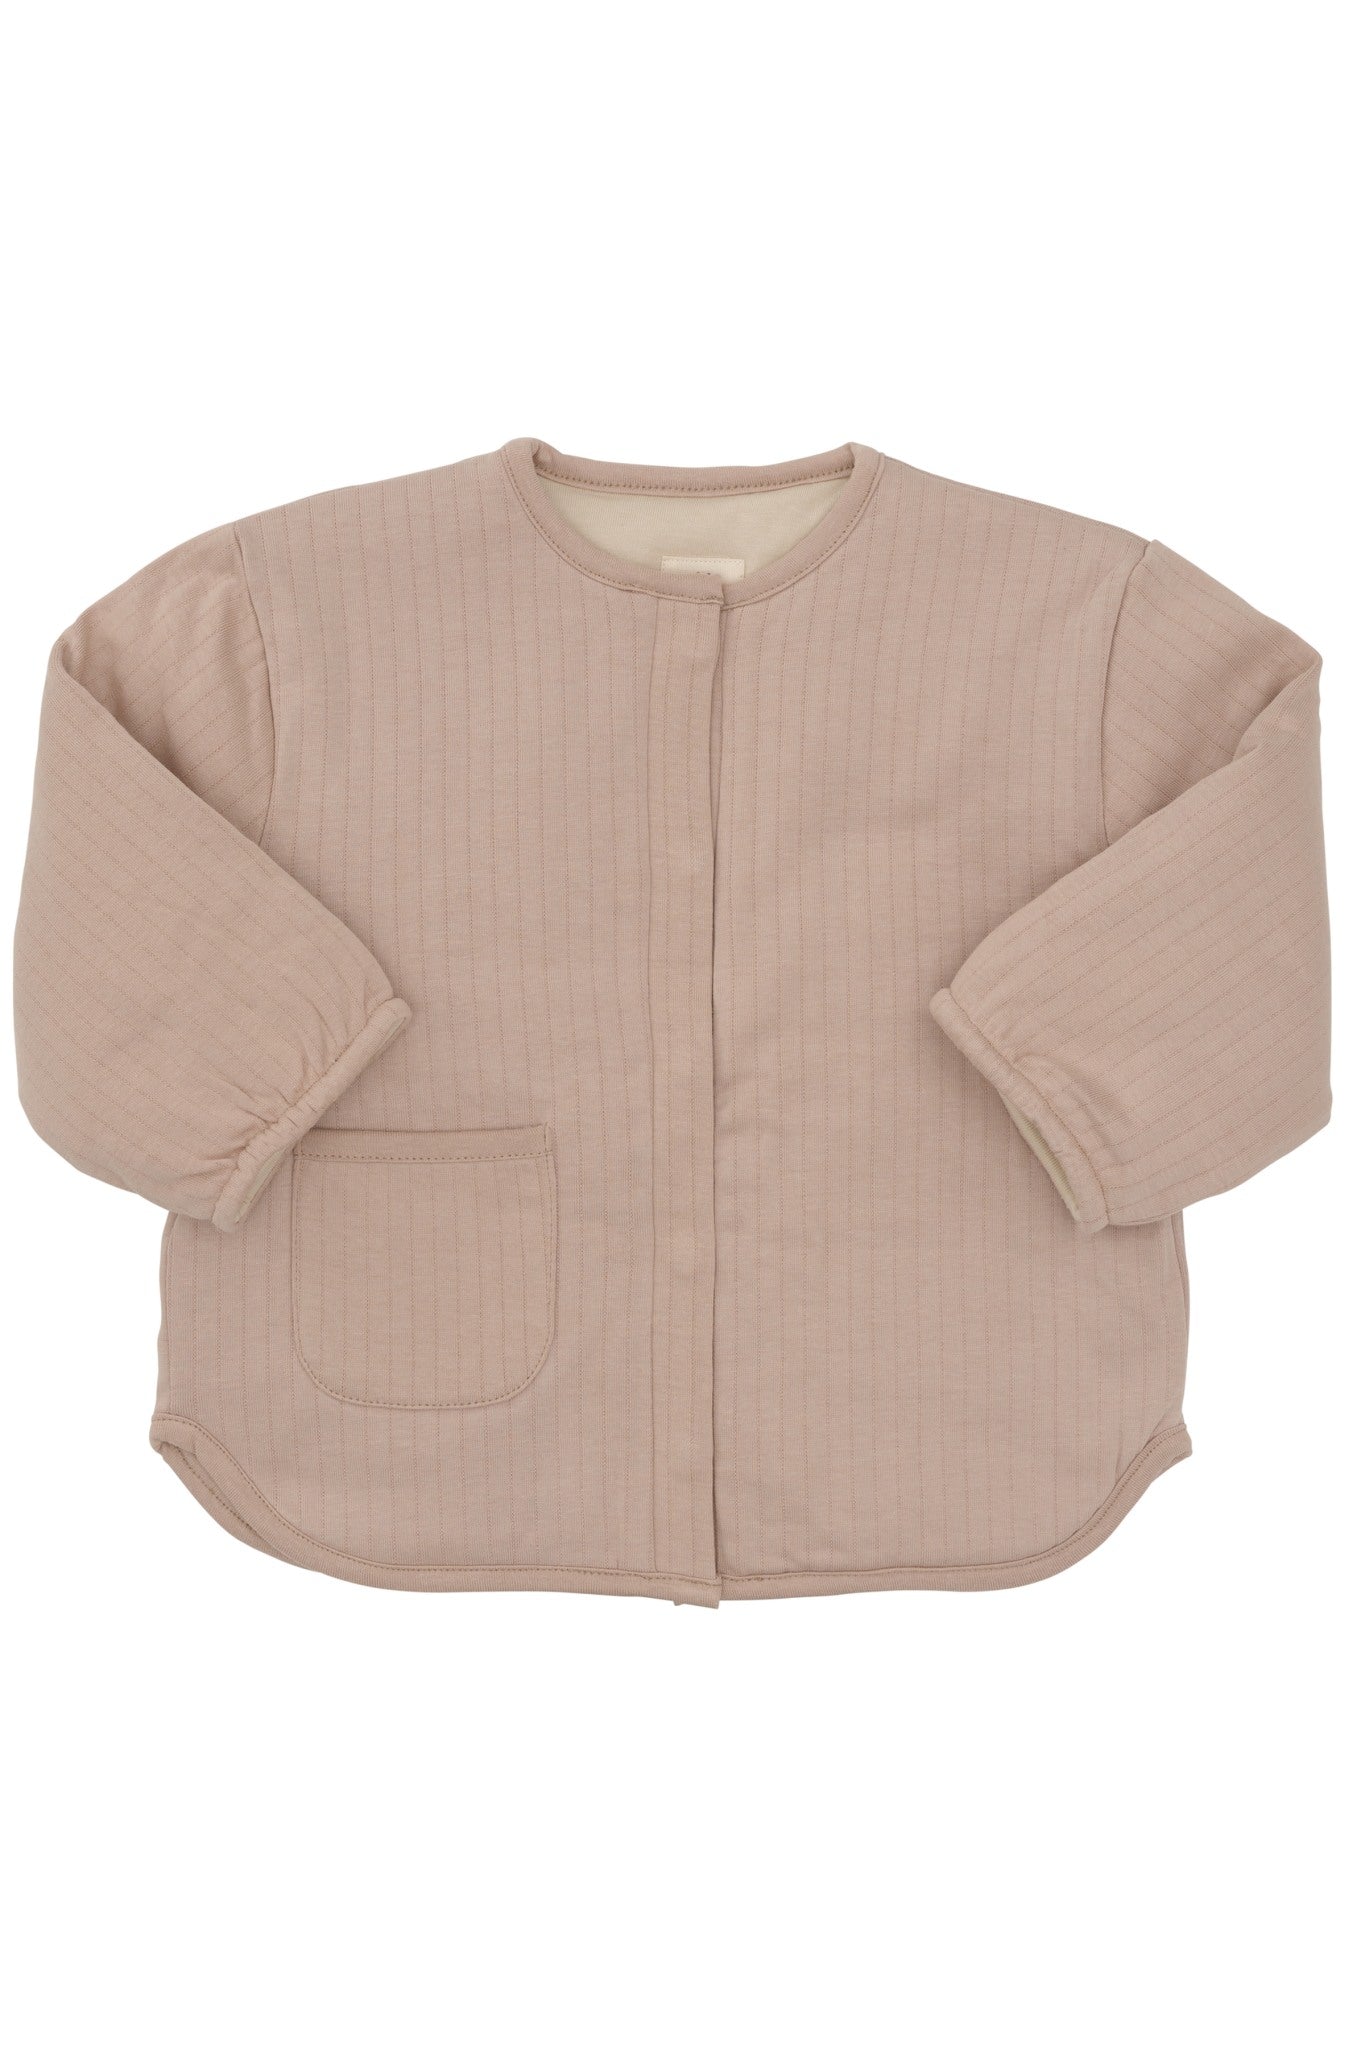 QUILTED REVERSIBLE JACKET - LT TAUPE CREAM COMB